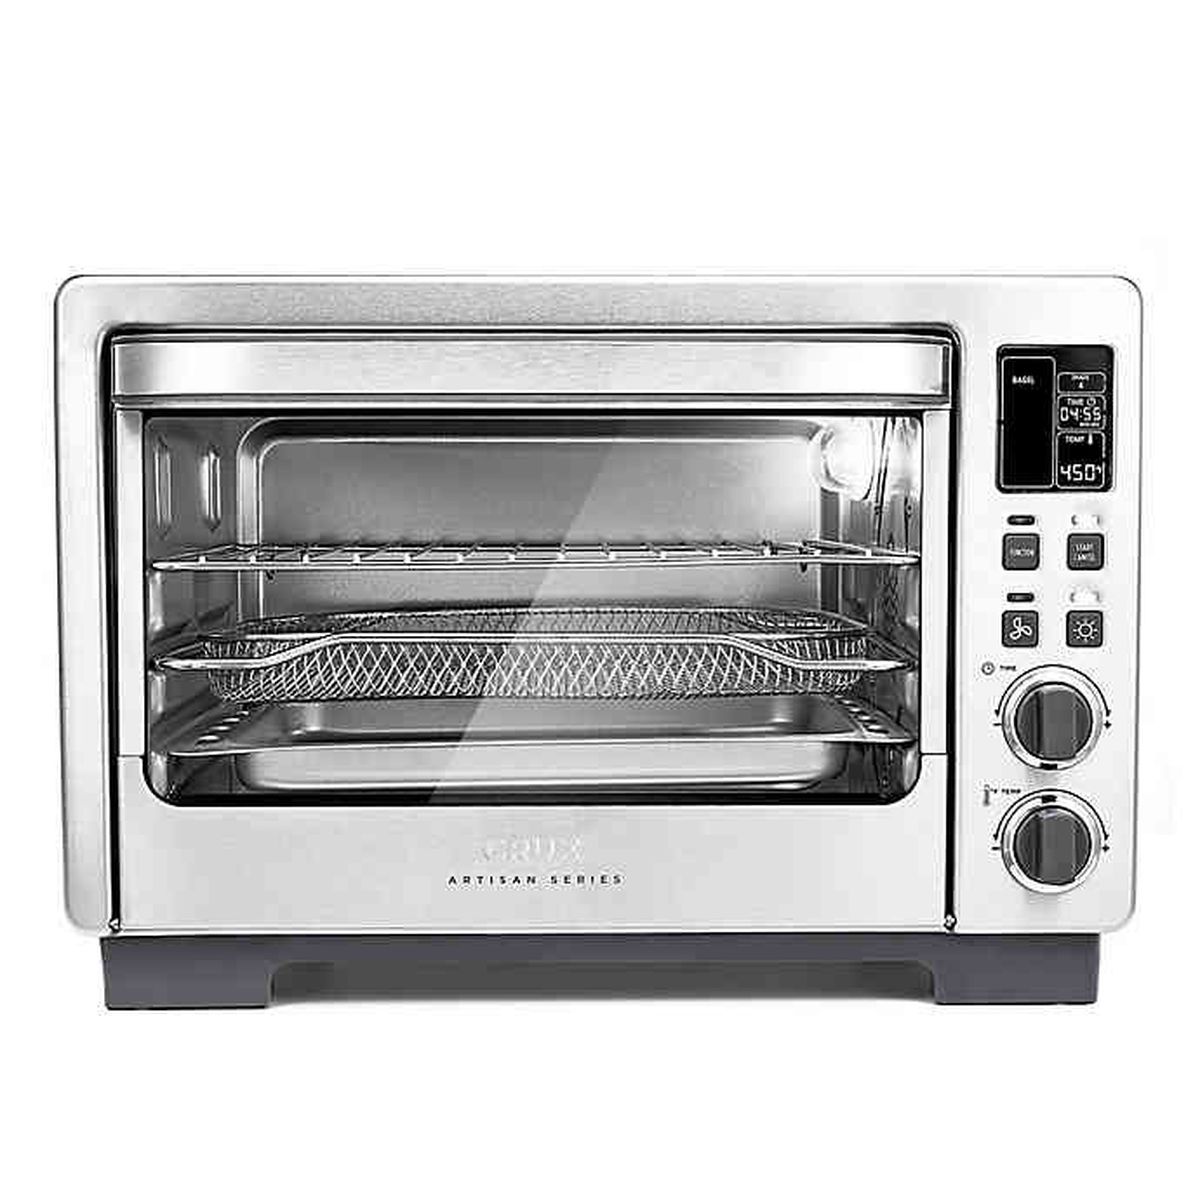 The Crux combo toaster oven and airfryer